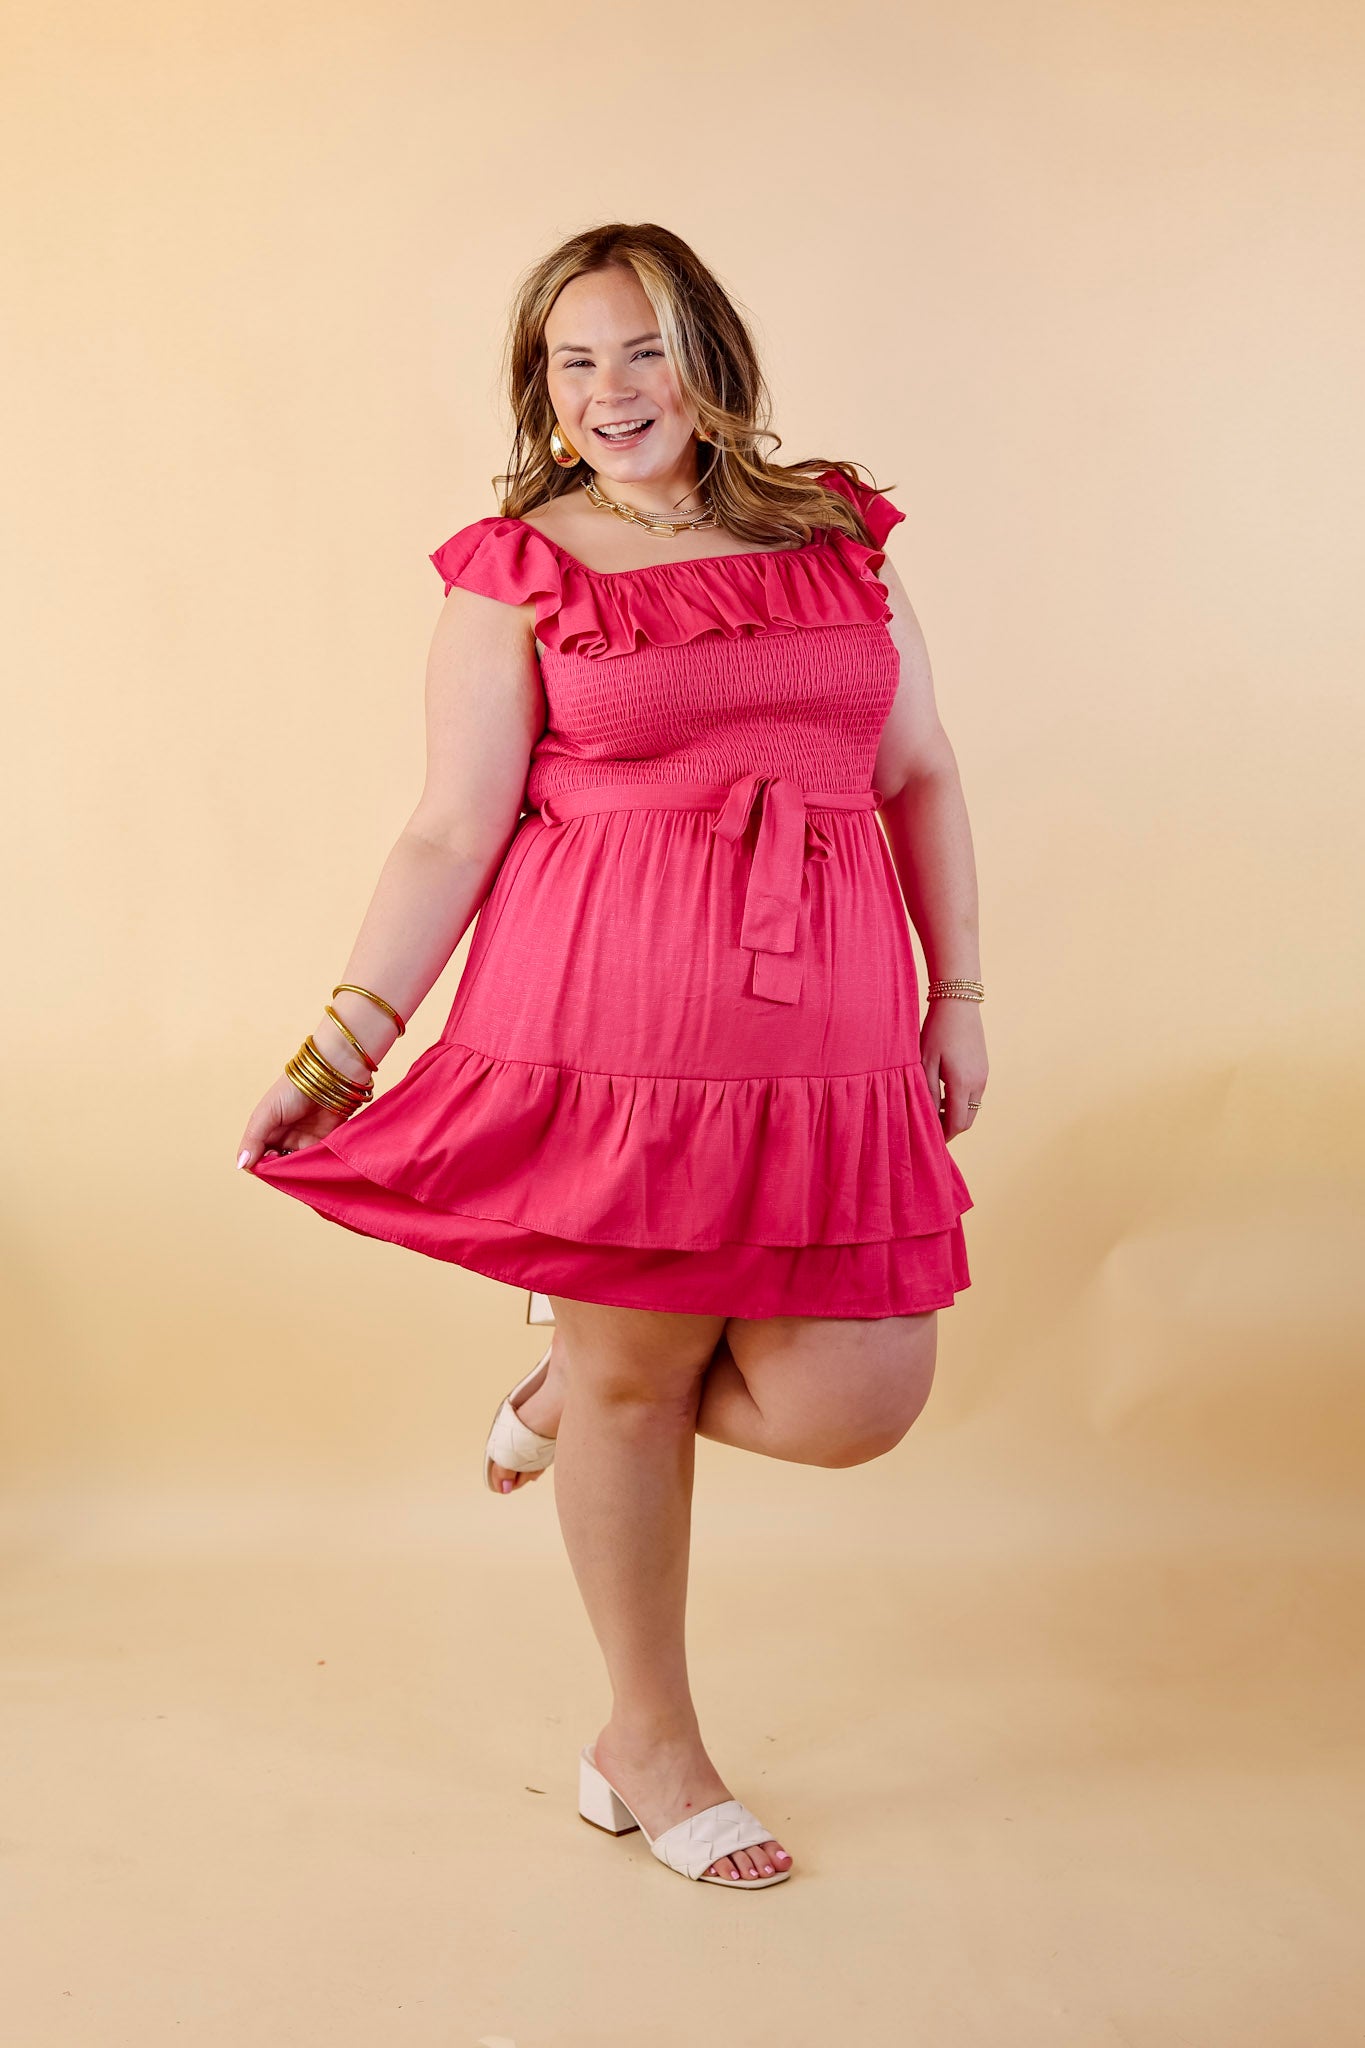 Feeling Refined Ruffle Tiered Dress with Smocked Bodice in Hot Pink - Giddy Up Glamour Boutique